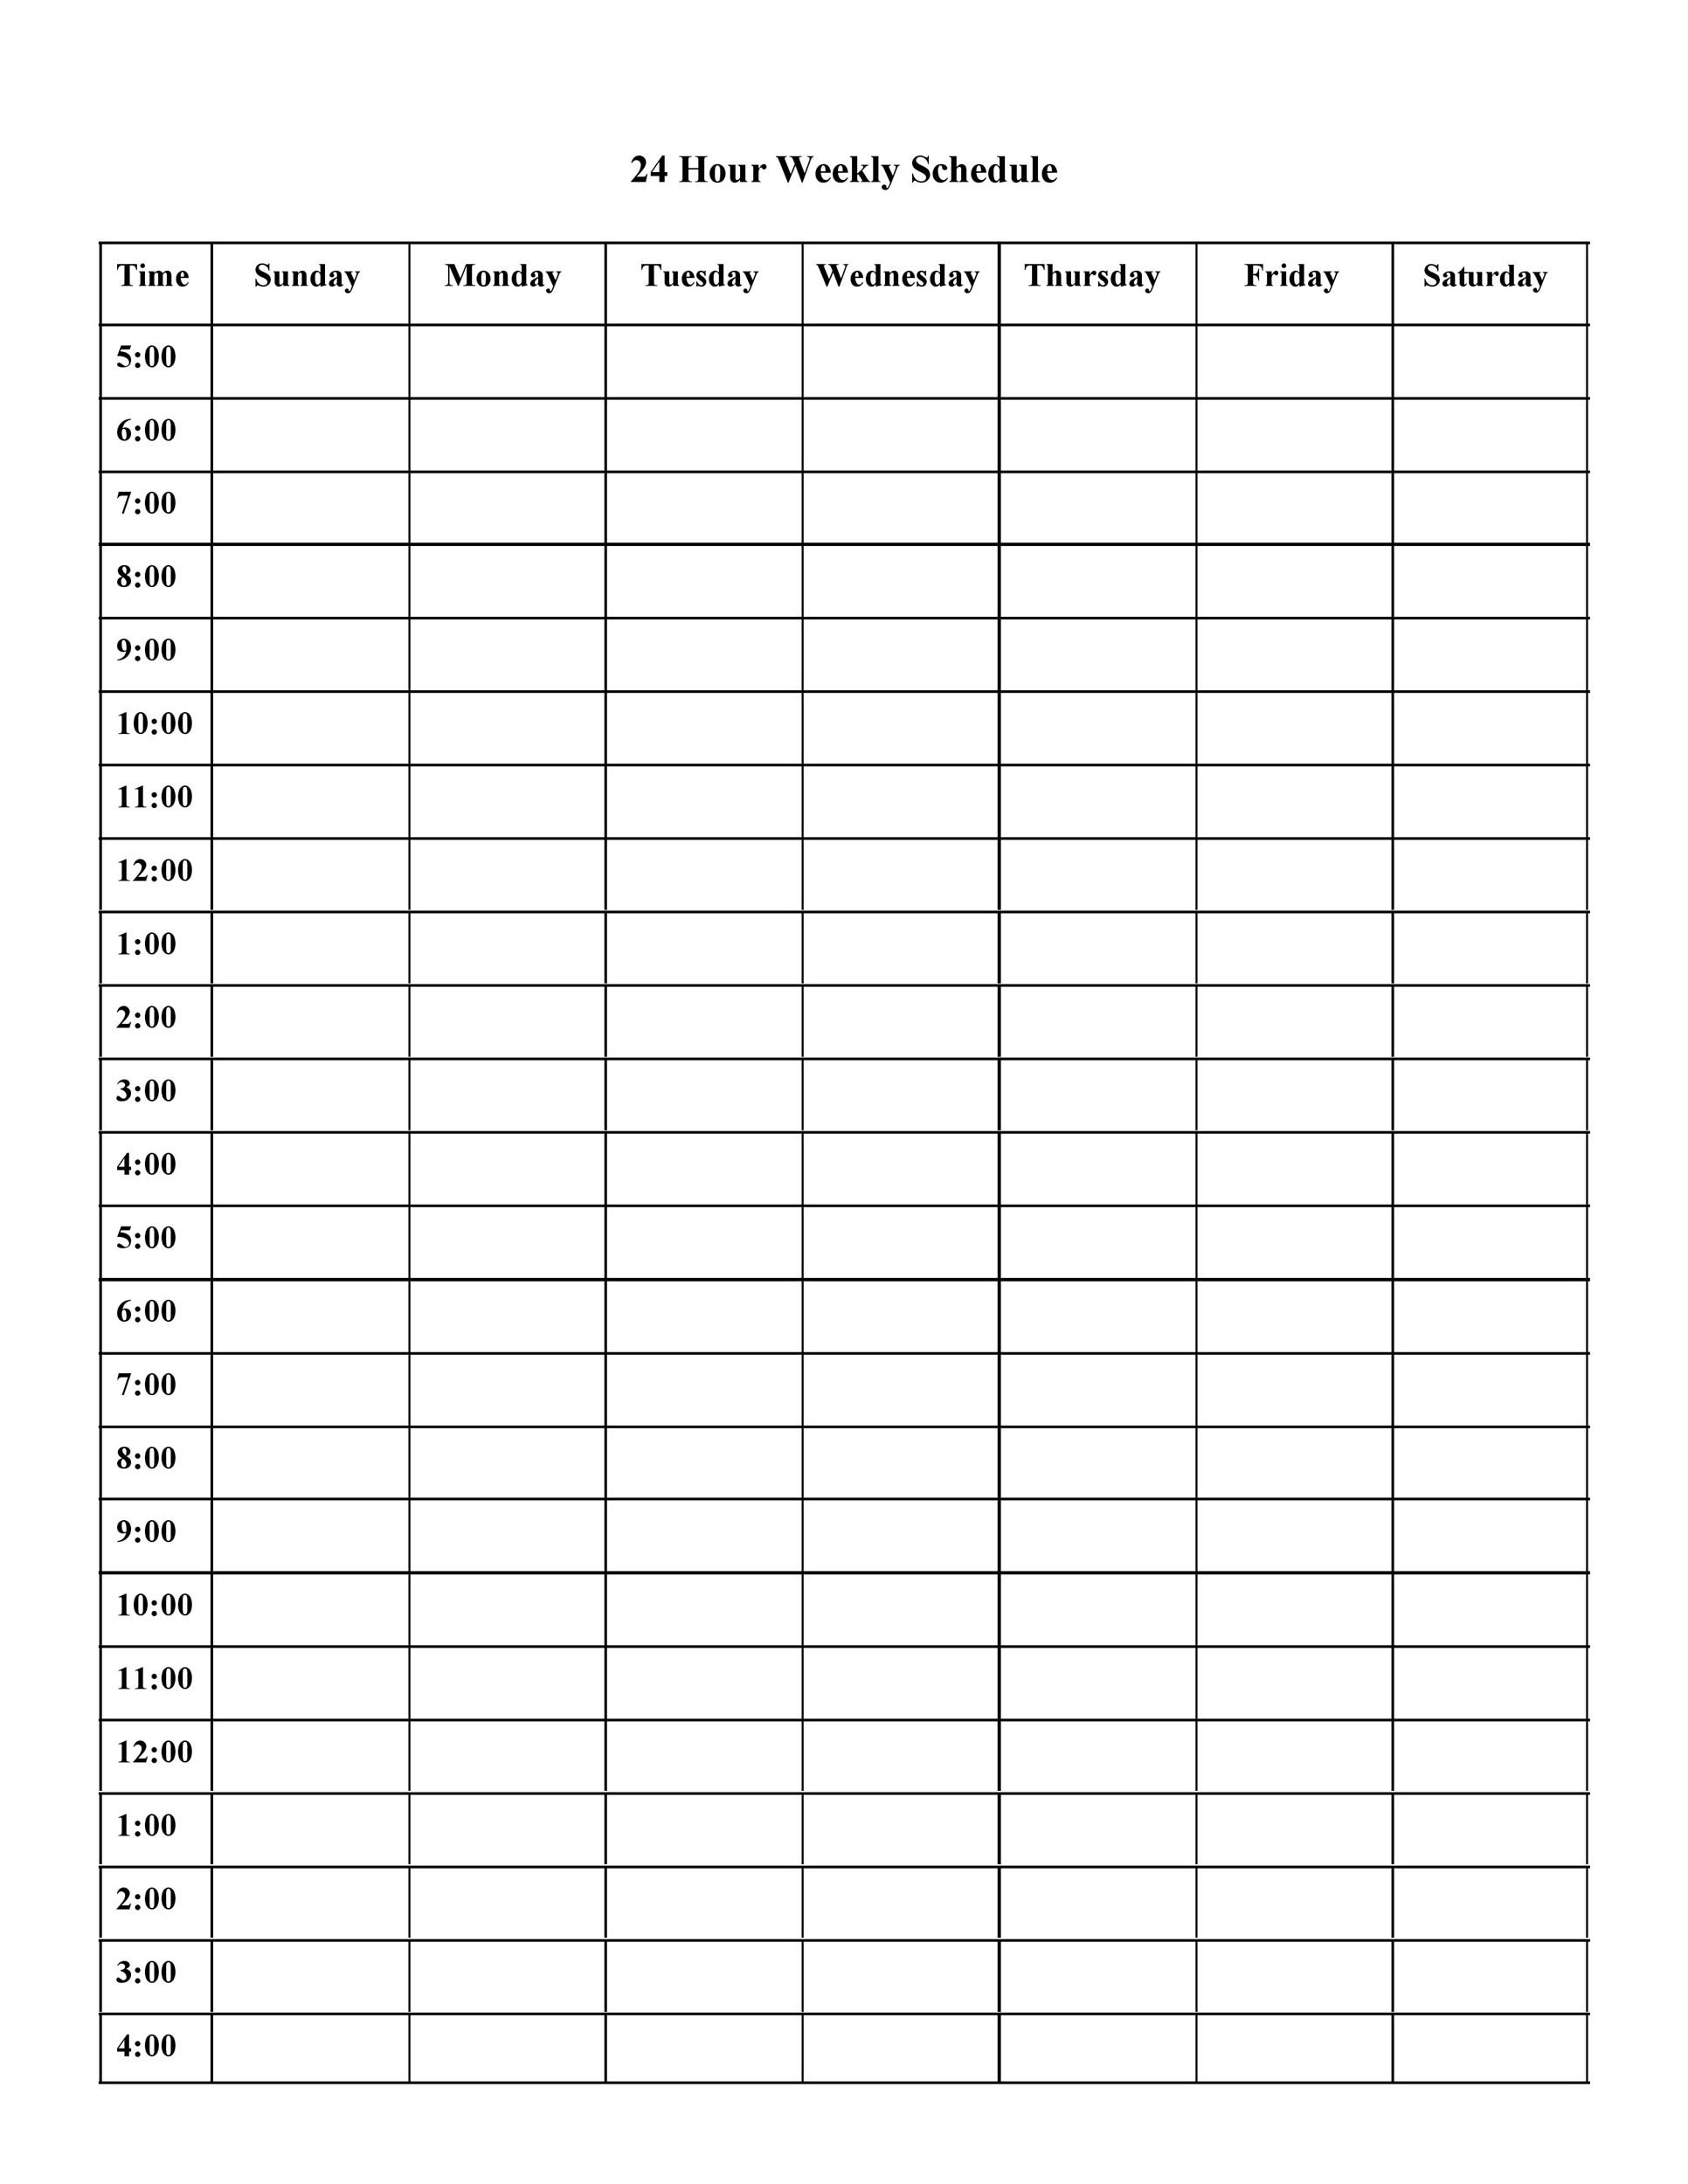 24 Hour Daily Schedule Template Database